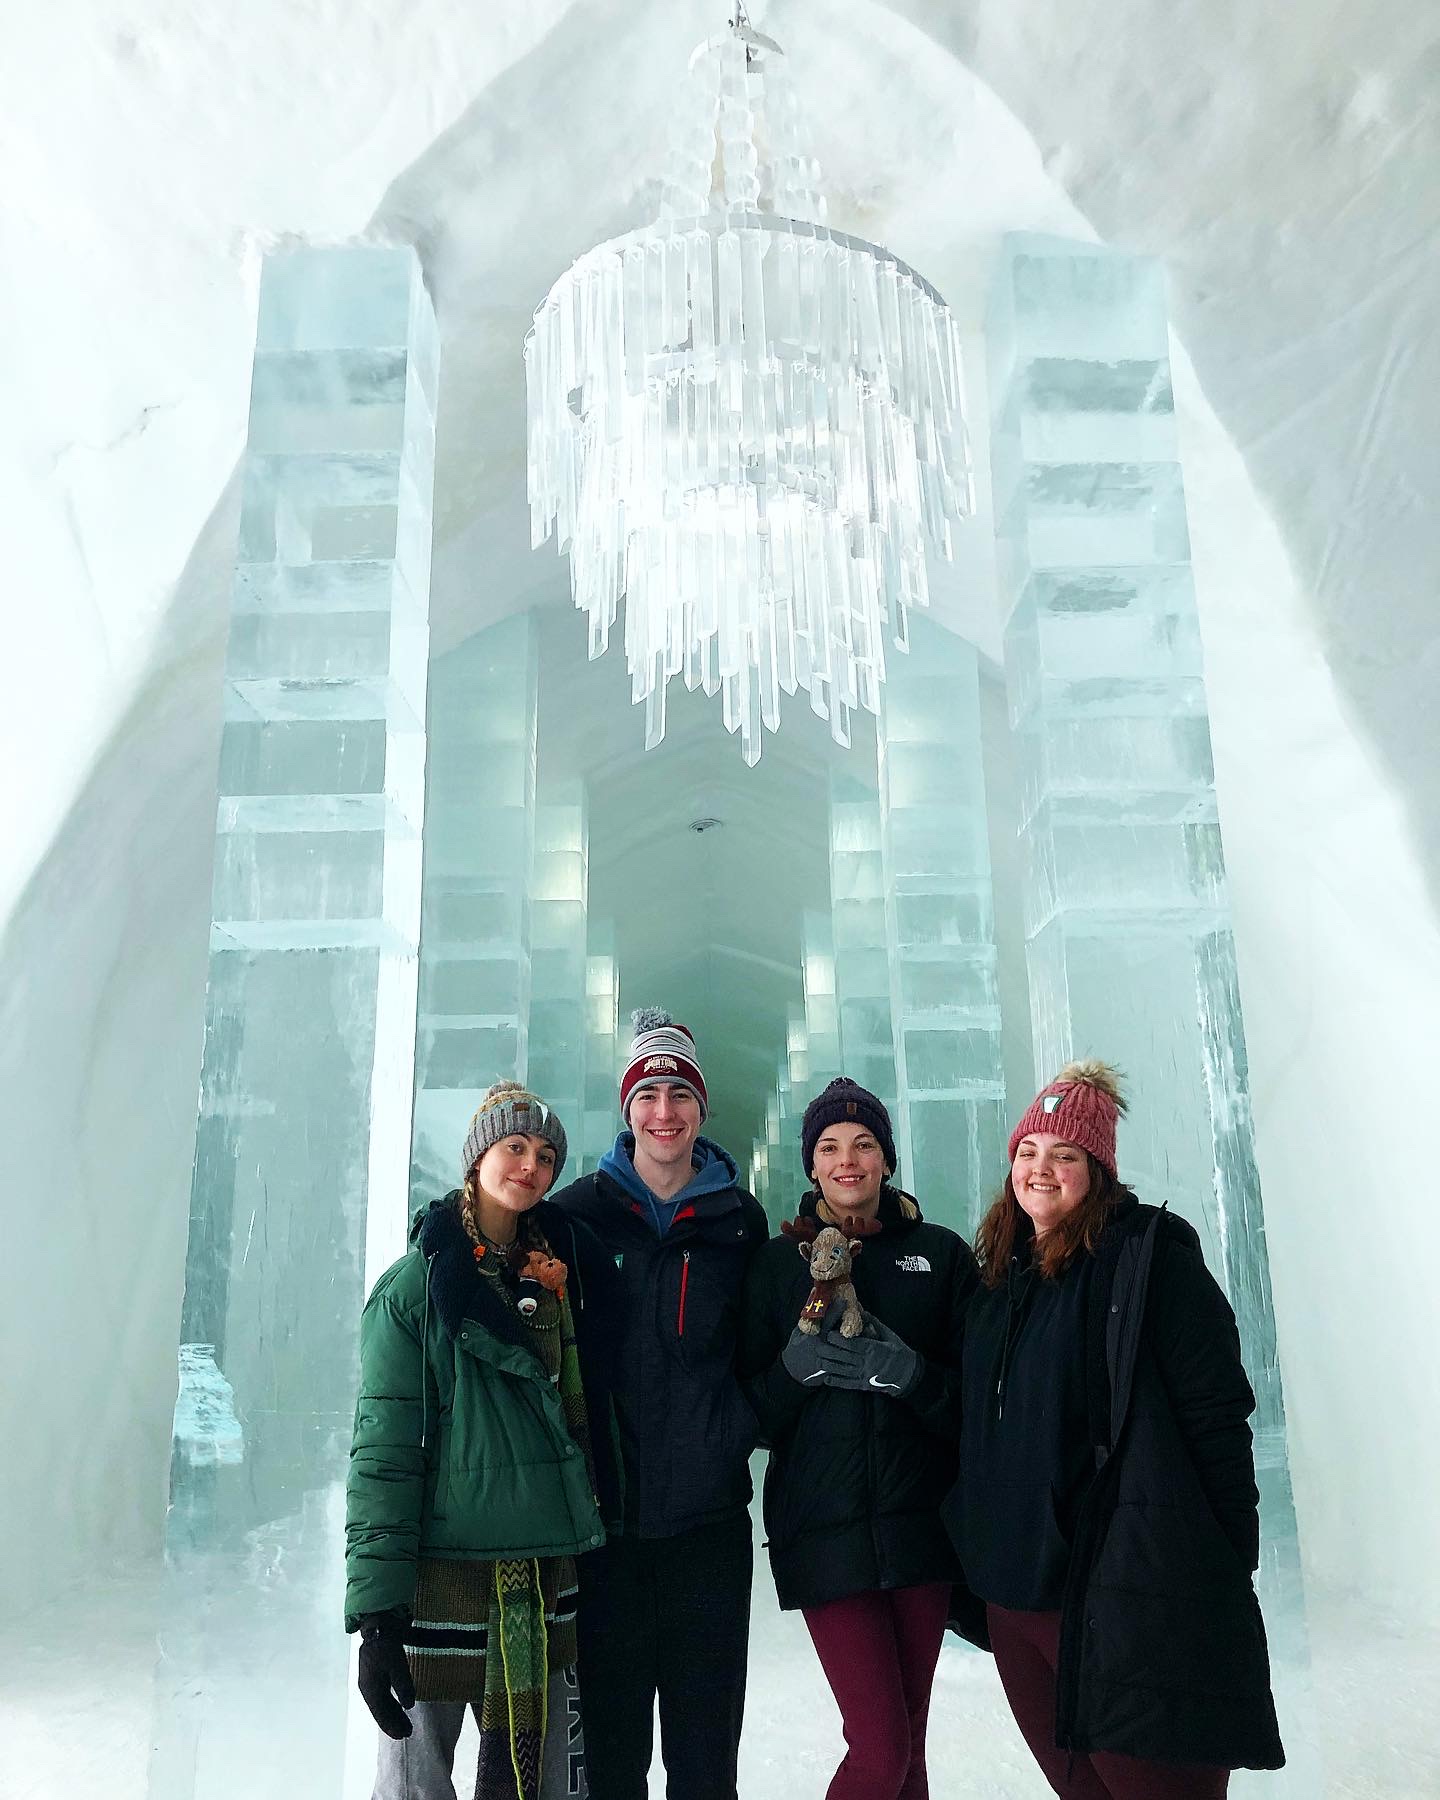 Students exploring the Ice Hotel in Sweden.